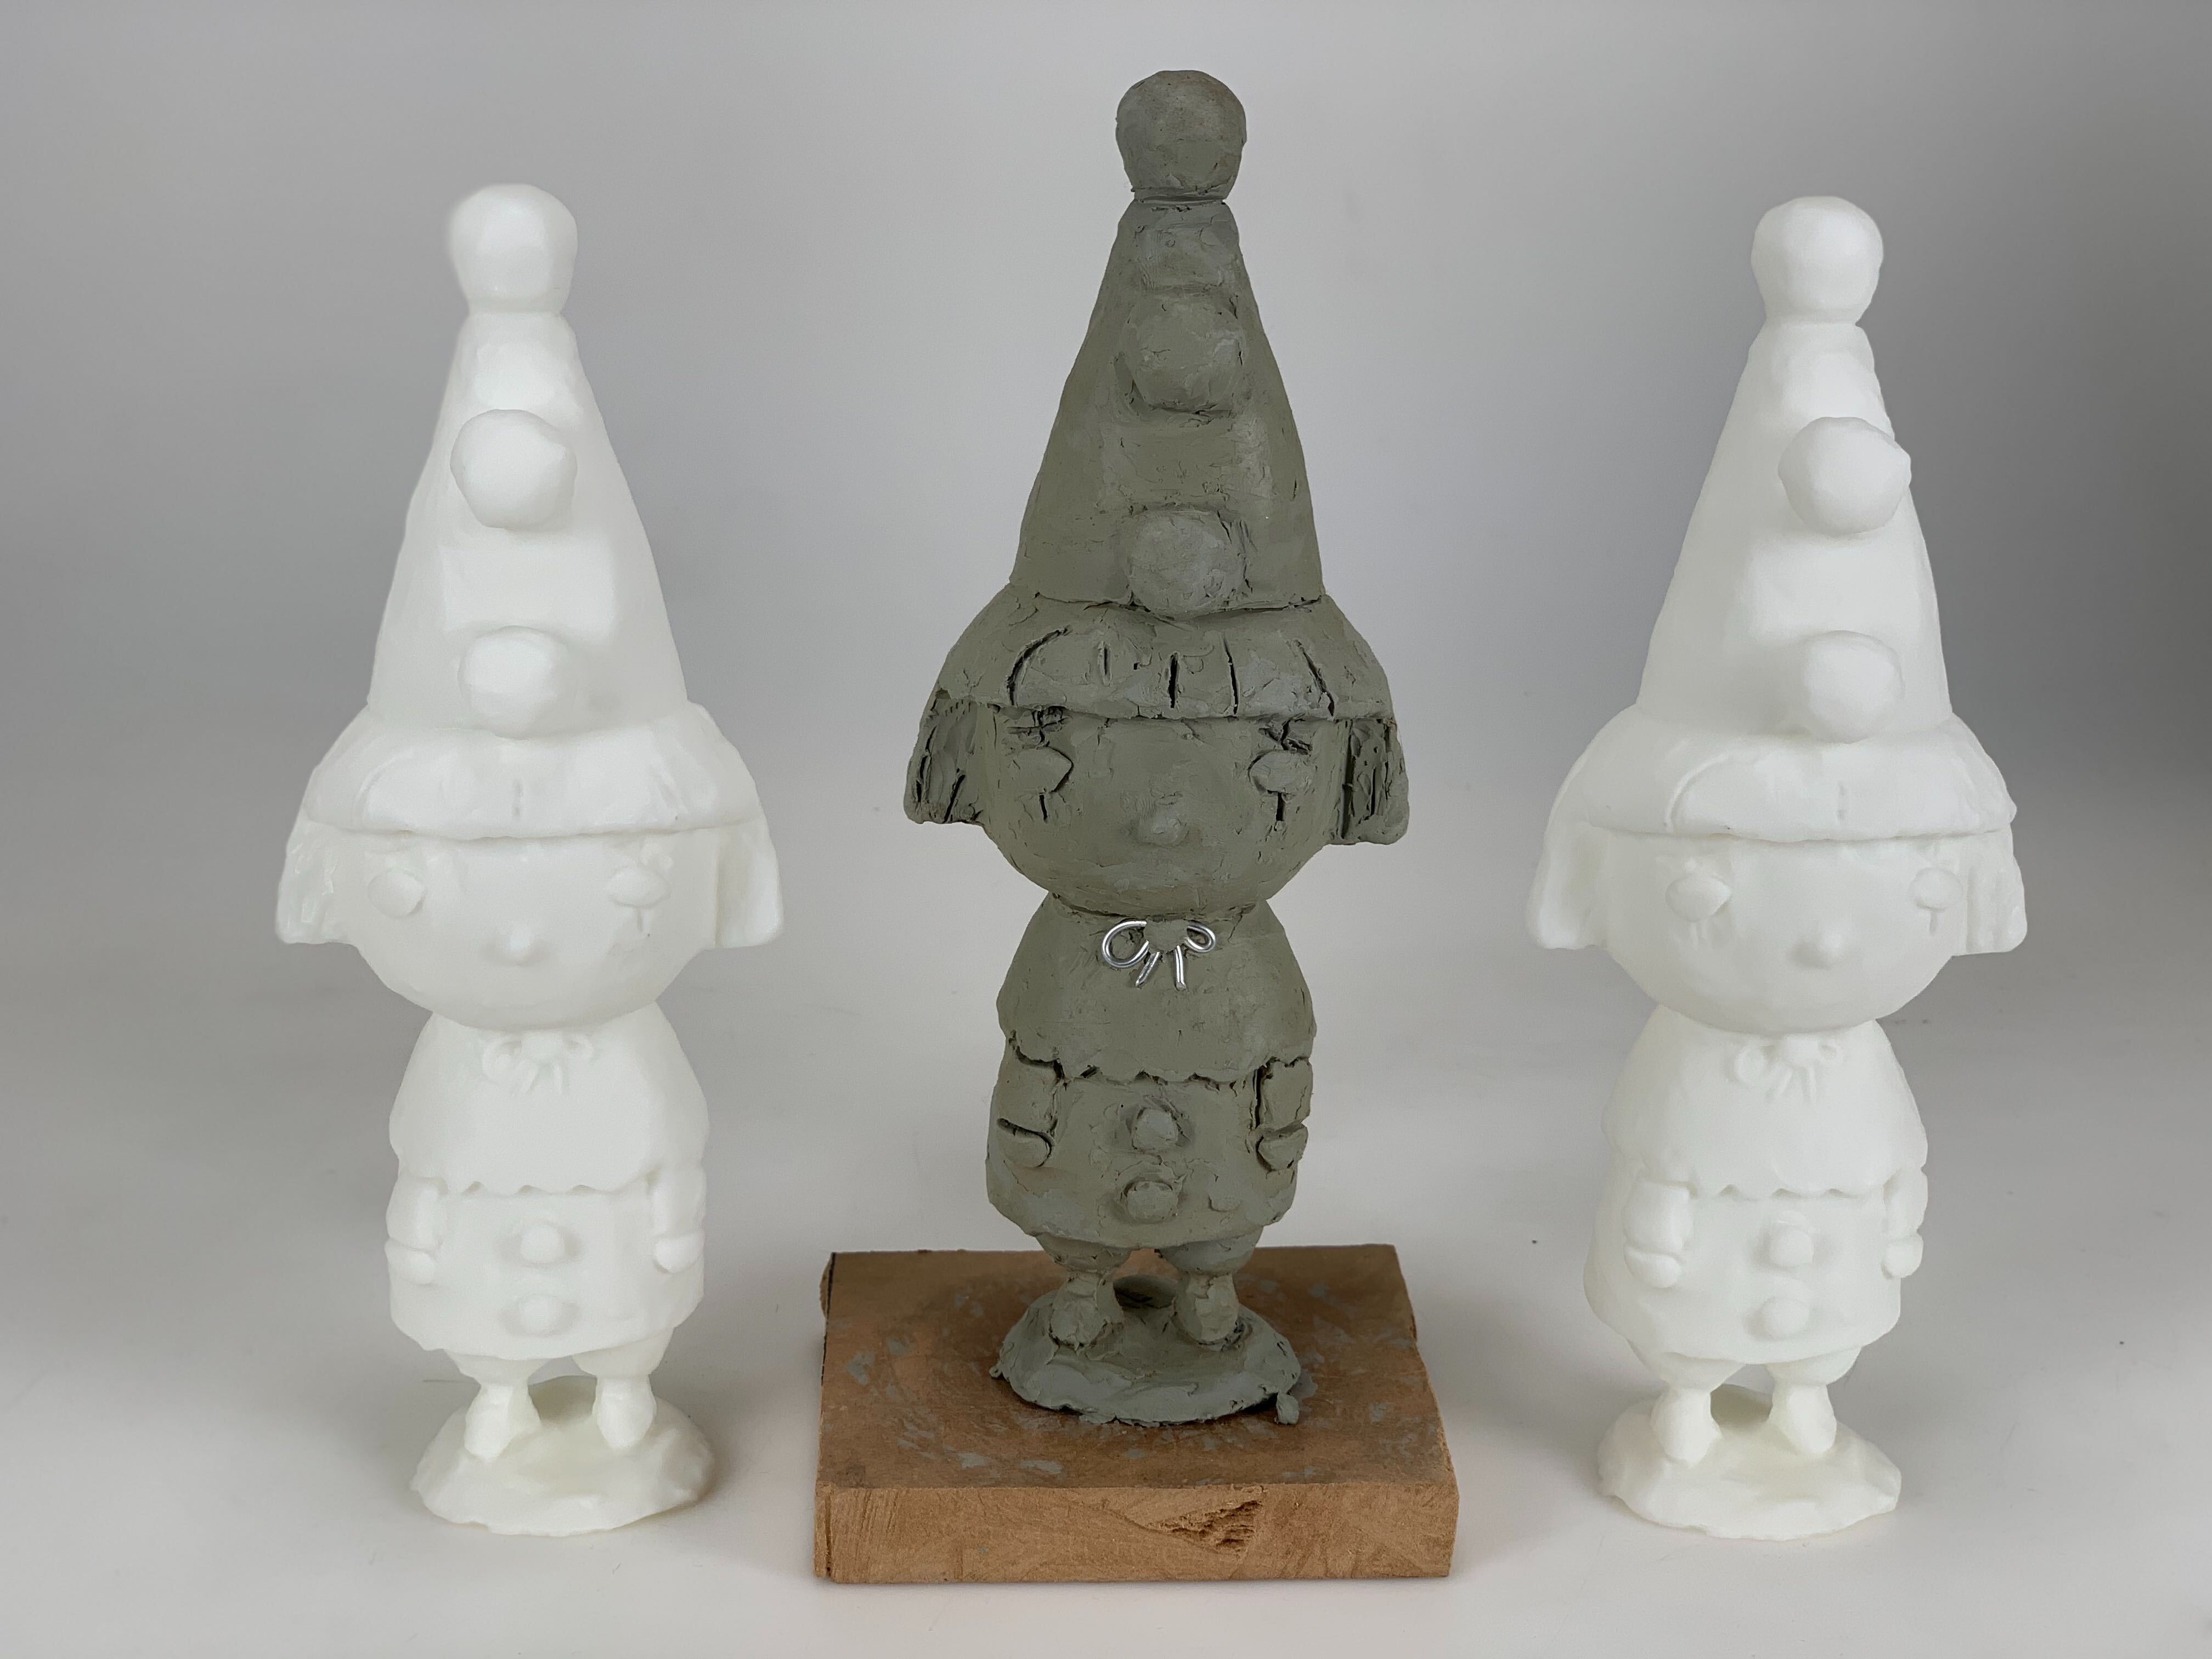 clay sculpture with 3d printed copies made using 3d scanning